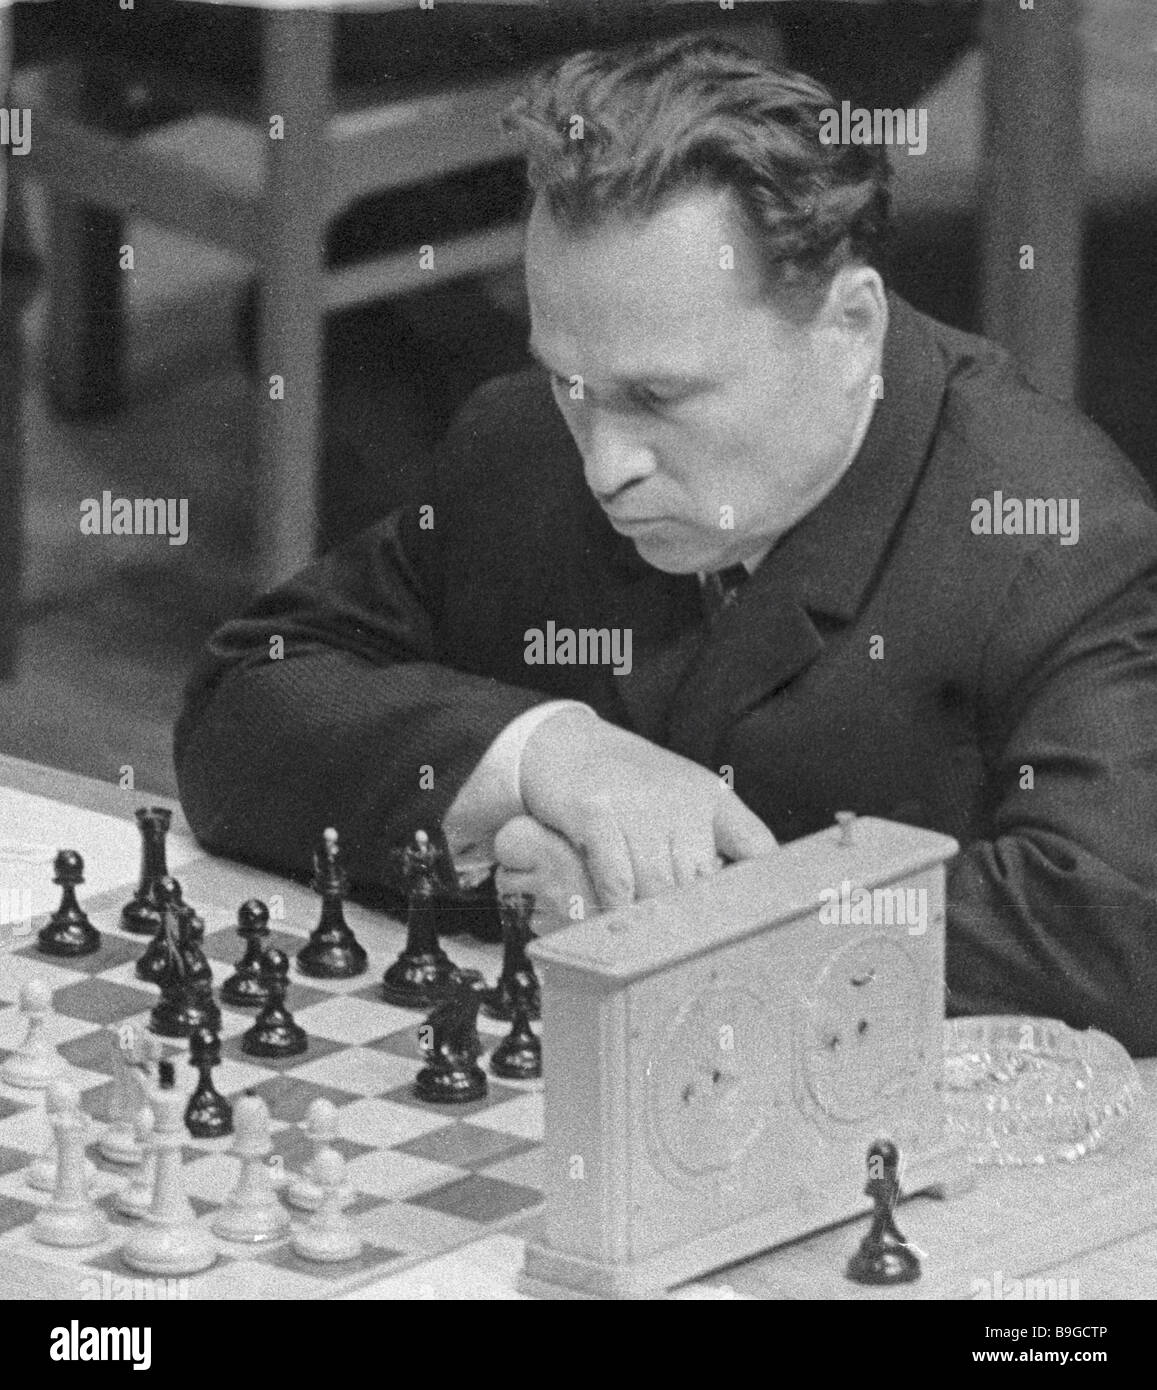 From Spotting Russian Spies To Plotting Next Chess Move